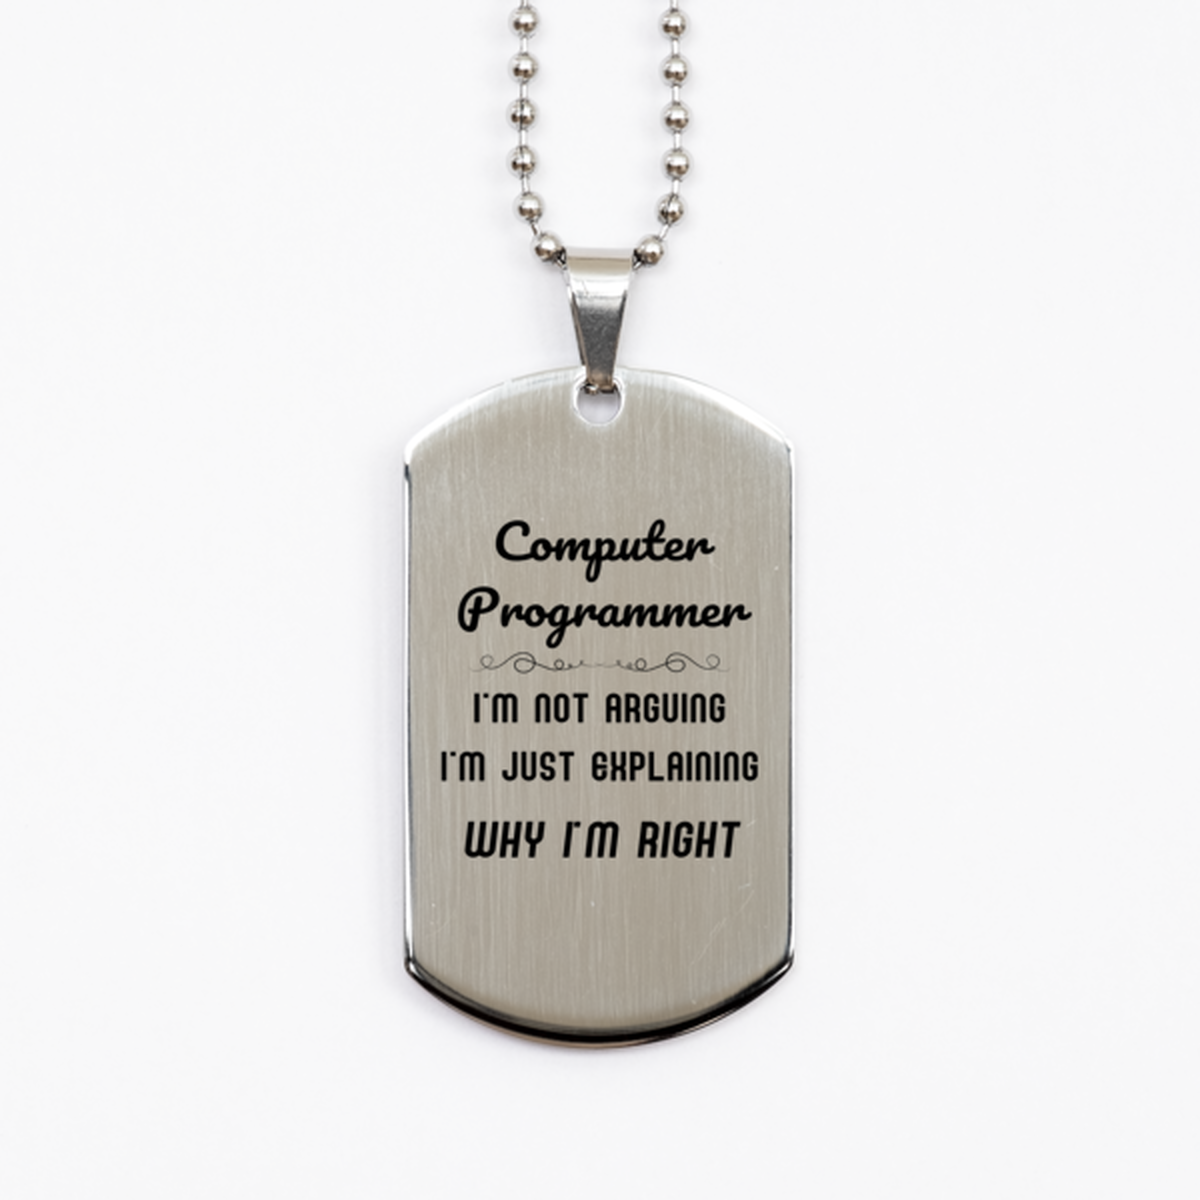 Computer Programmer I'm not Arguing. I'm Just Explaining Why I'm RIGHT Silver Dog Tag, Funny Saying Quote Computer Programmer Gifts For Computer Programmer Graduation Birthday Christmas Gifts for Men Women Coworker